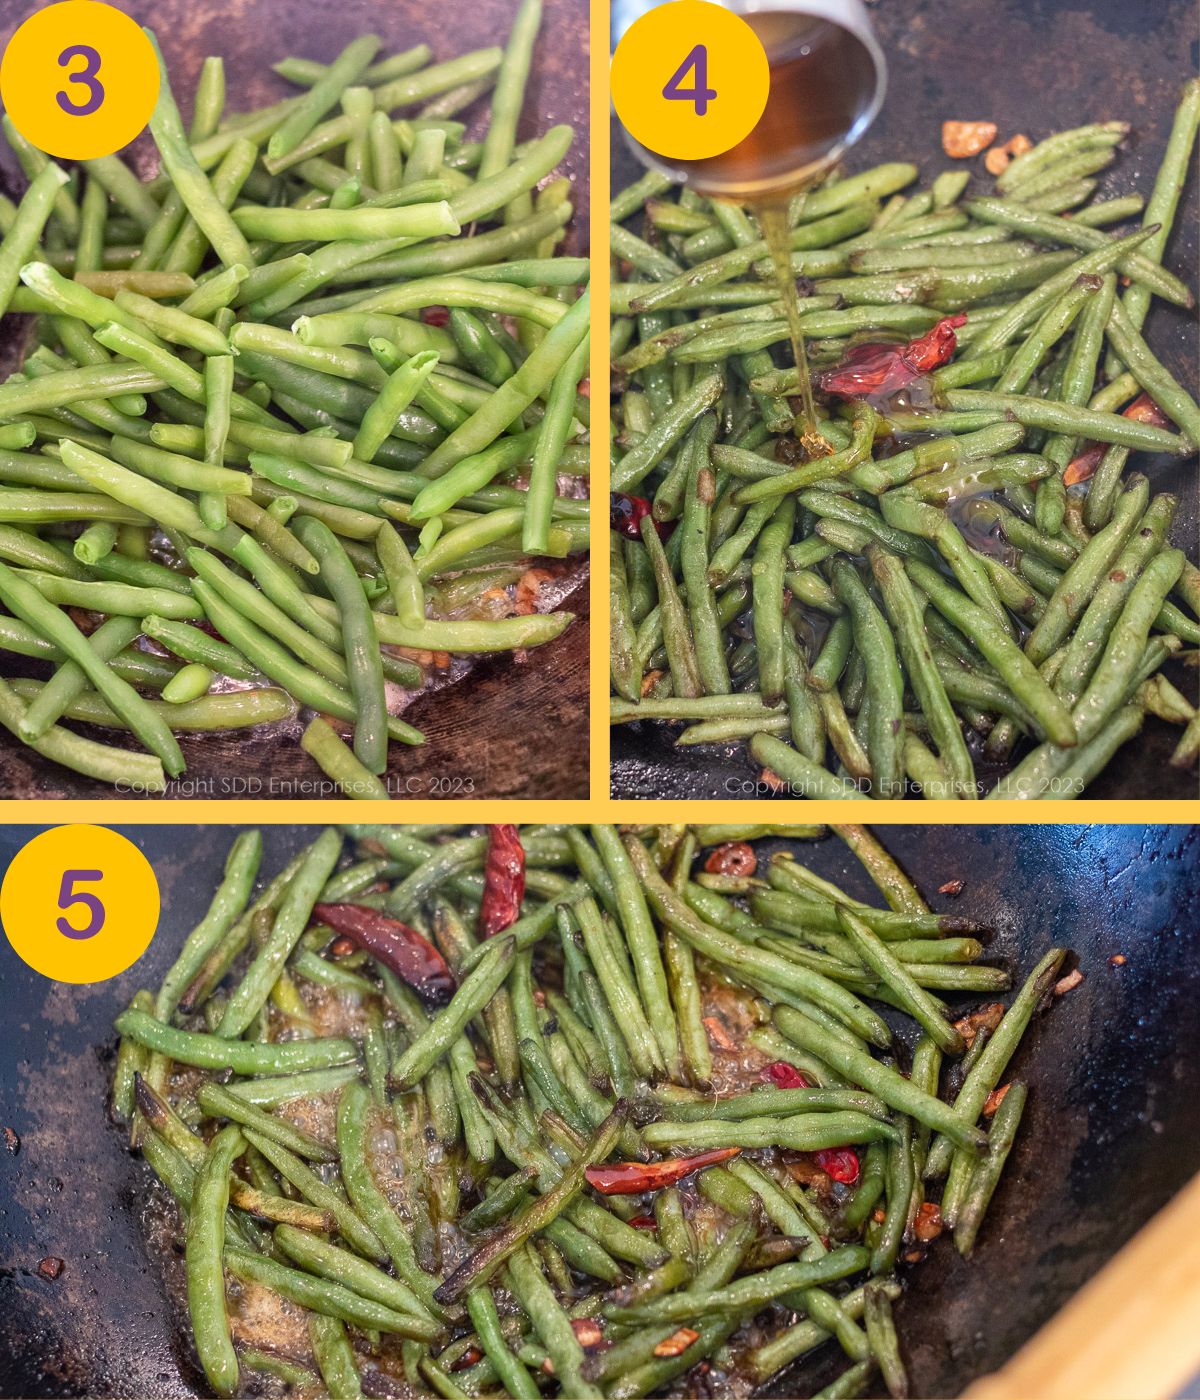 Finishing steps for sautéed green beans in a wok.